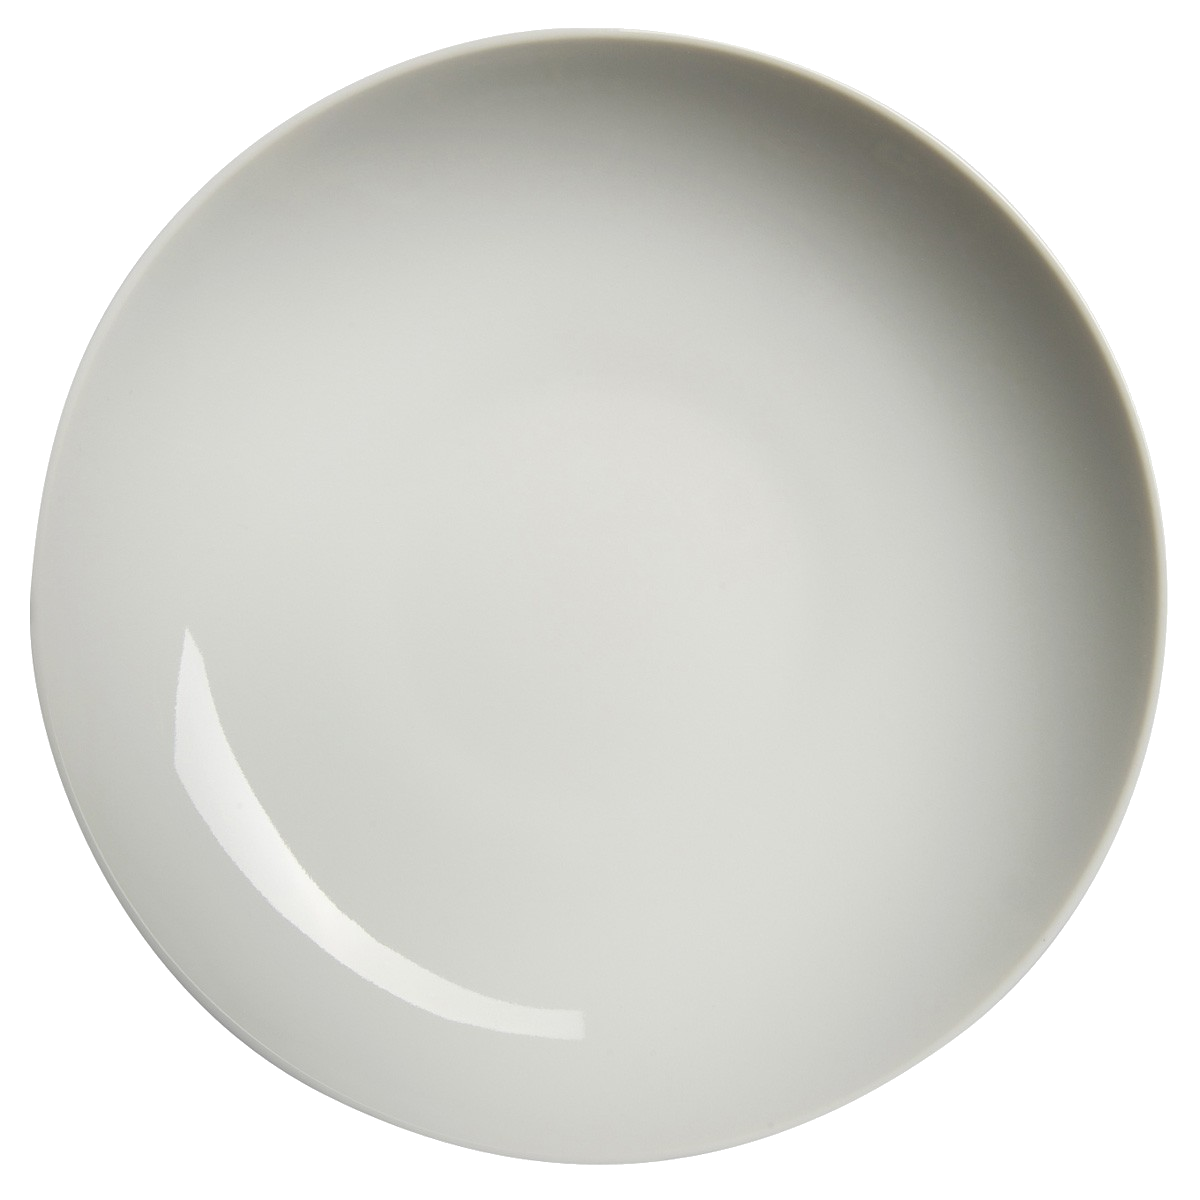 red plate PNG image